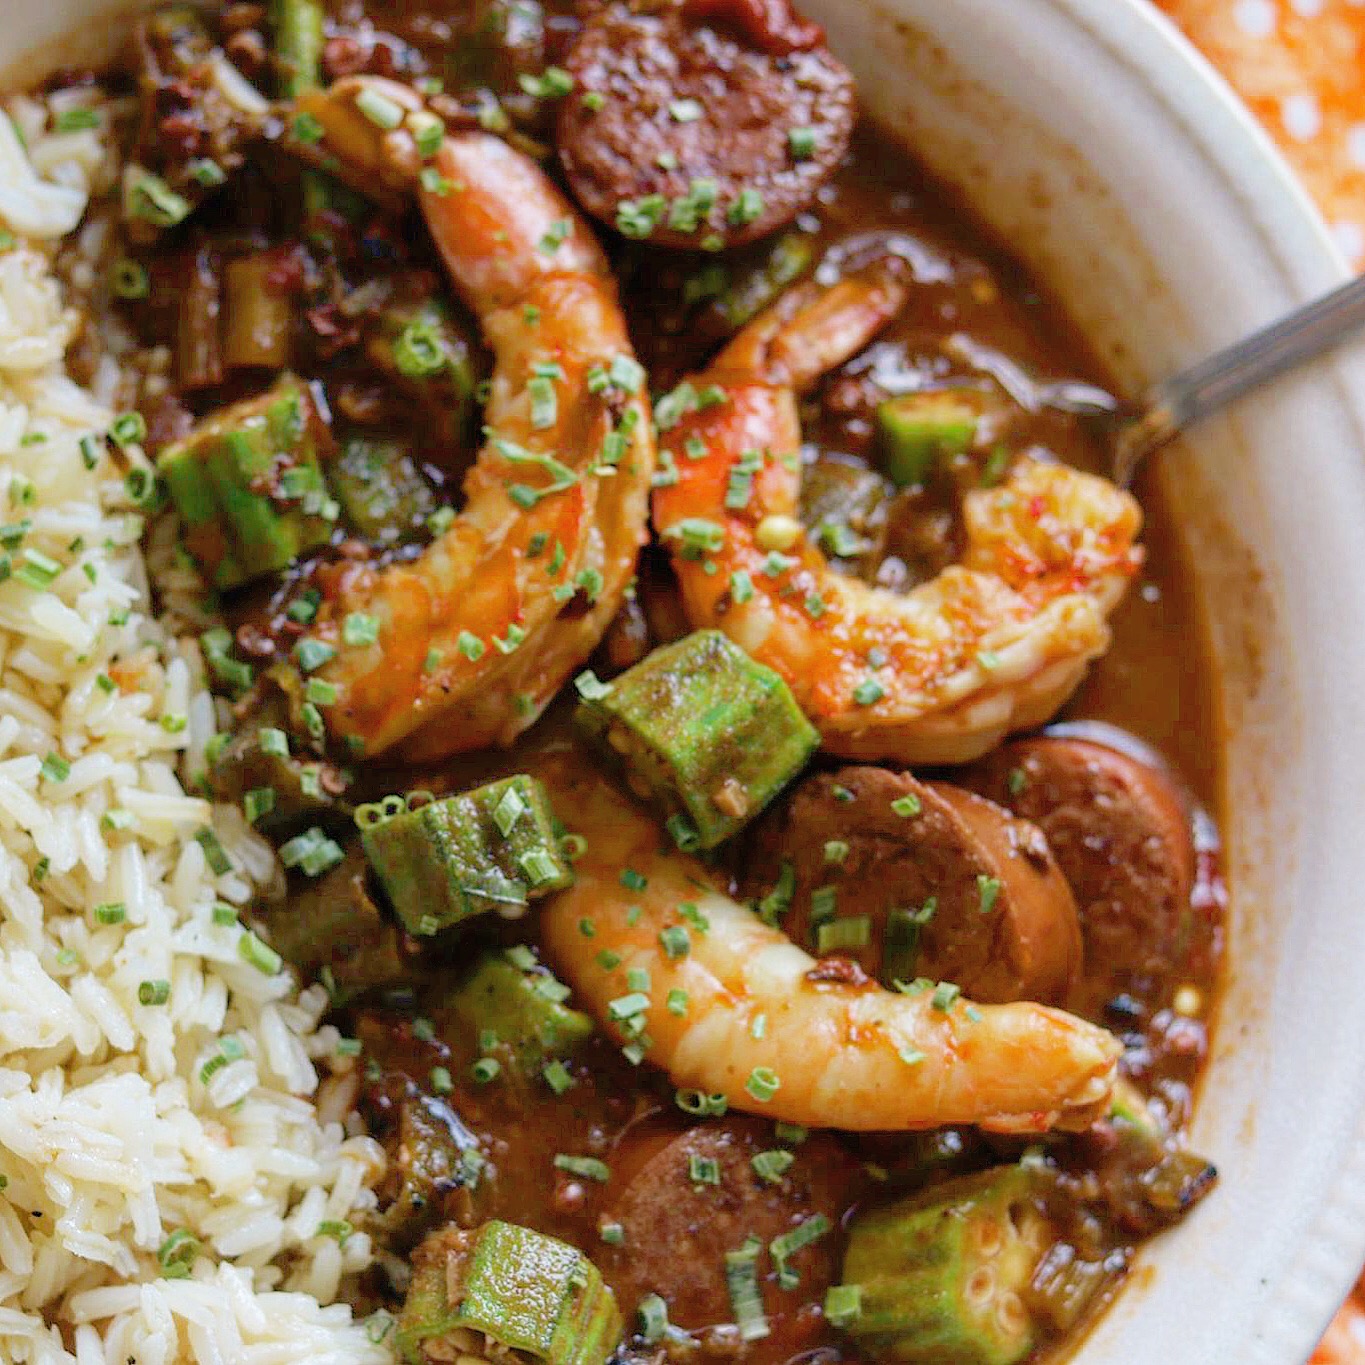 Love Gumbo This Super Shrimp Okra And Andouille Smoked Sausage Gumbo Is Over The Top The 2 Spoons,Chestnut Puree Recipe